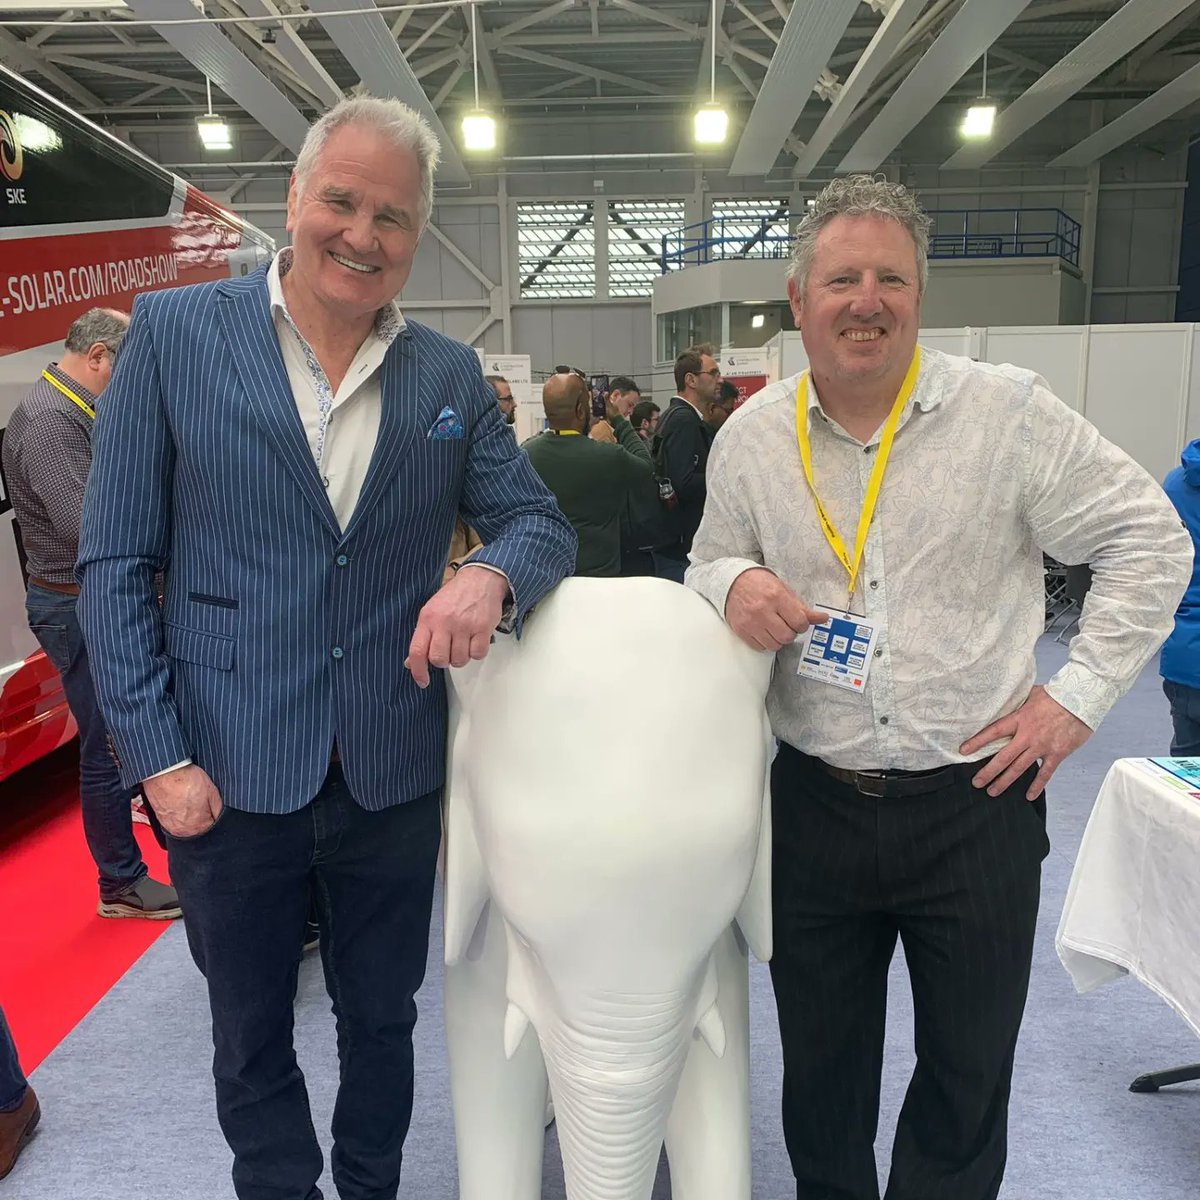 Our elephants have arrived! You HERD it here first, they've been spotted in the @ConstructSummit 😎👷🚧 It's great to see Brent and Dave here talking about the Elephant in the room 🐘👀 #elephantintheroom #mentalhealth #brentpope @DaveSouthern15 @theartoftourism